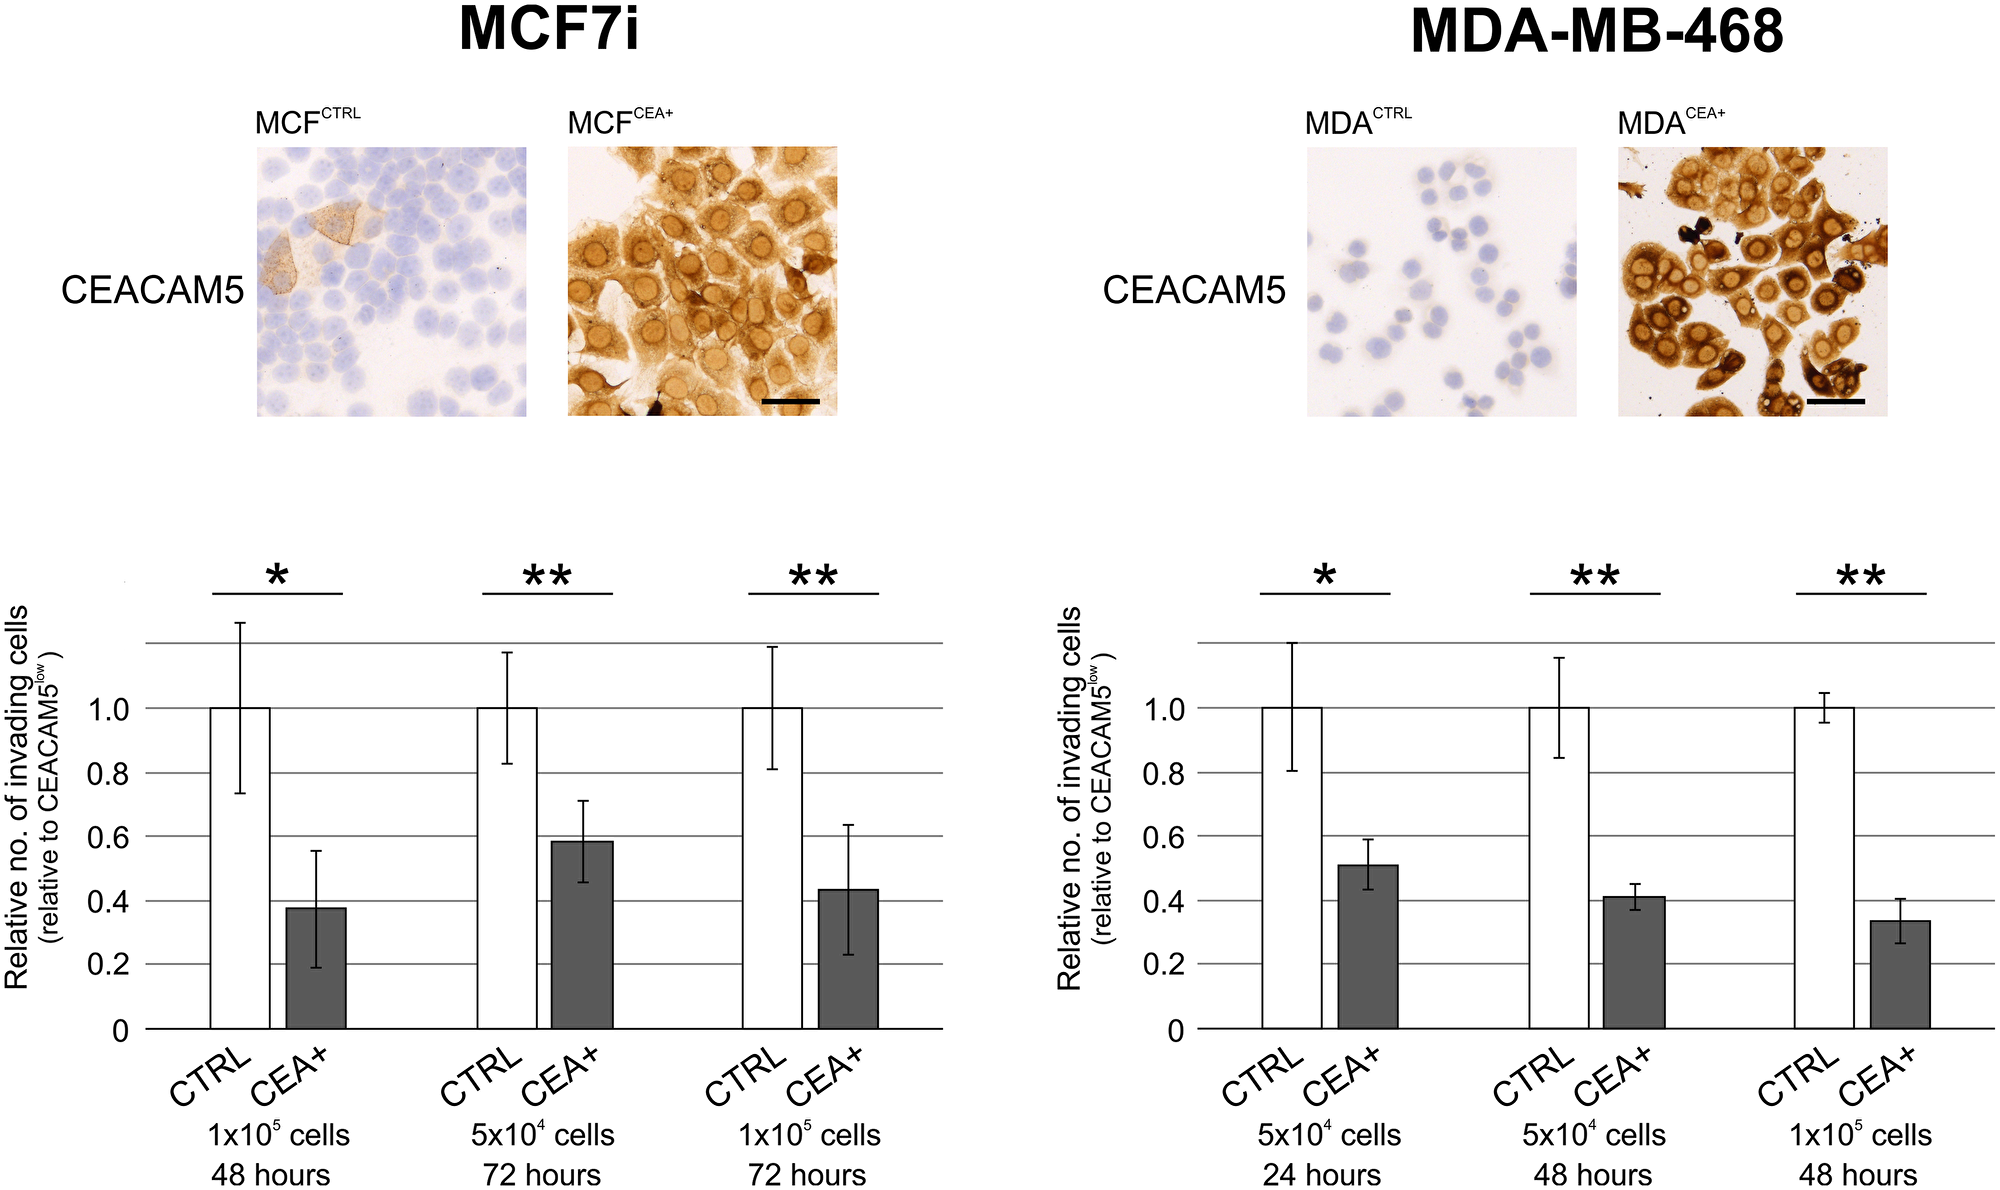 CEACAM5-positive breast cancer cells are less invasive in culture.